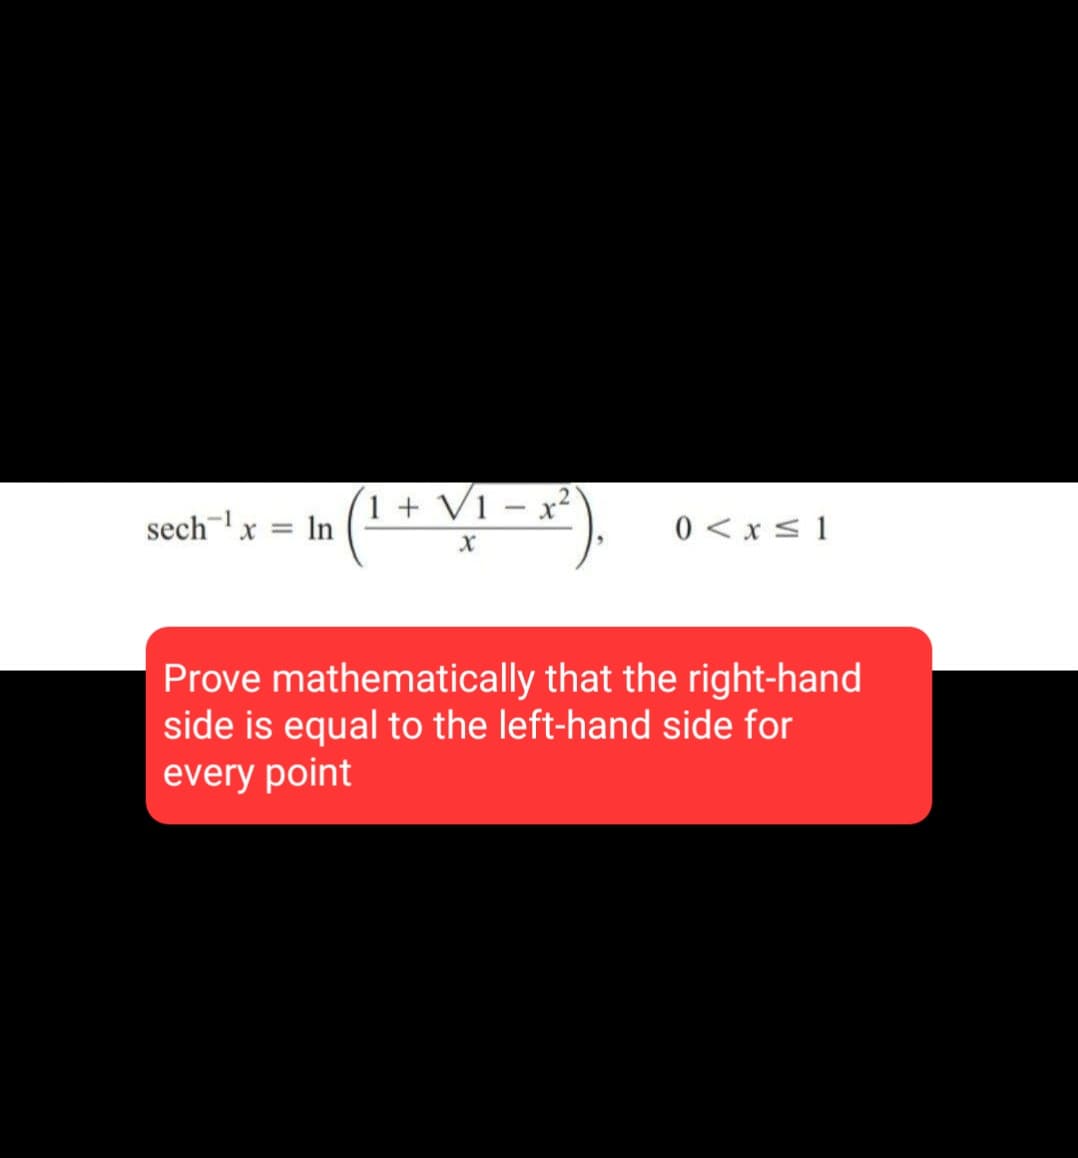 sech¹x = ln
1 + √1 - x²
0 < x ≤ 1
X
Prove mathematically that the right-hand
side is equal to the left-hand side for
every point